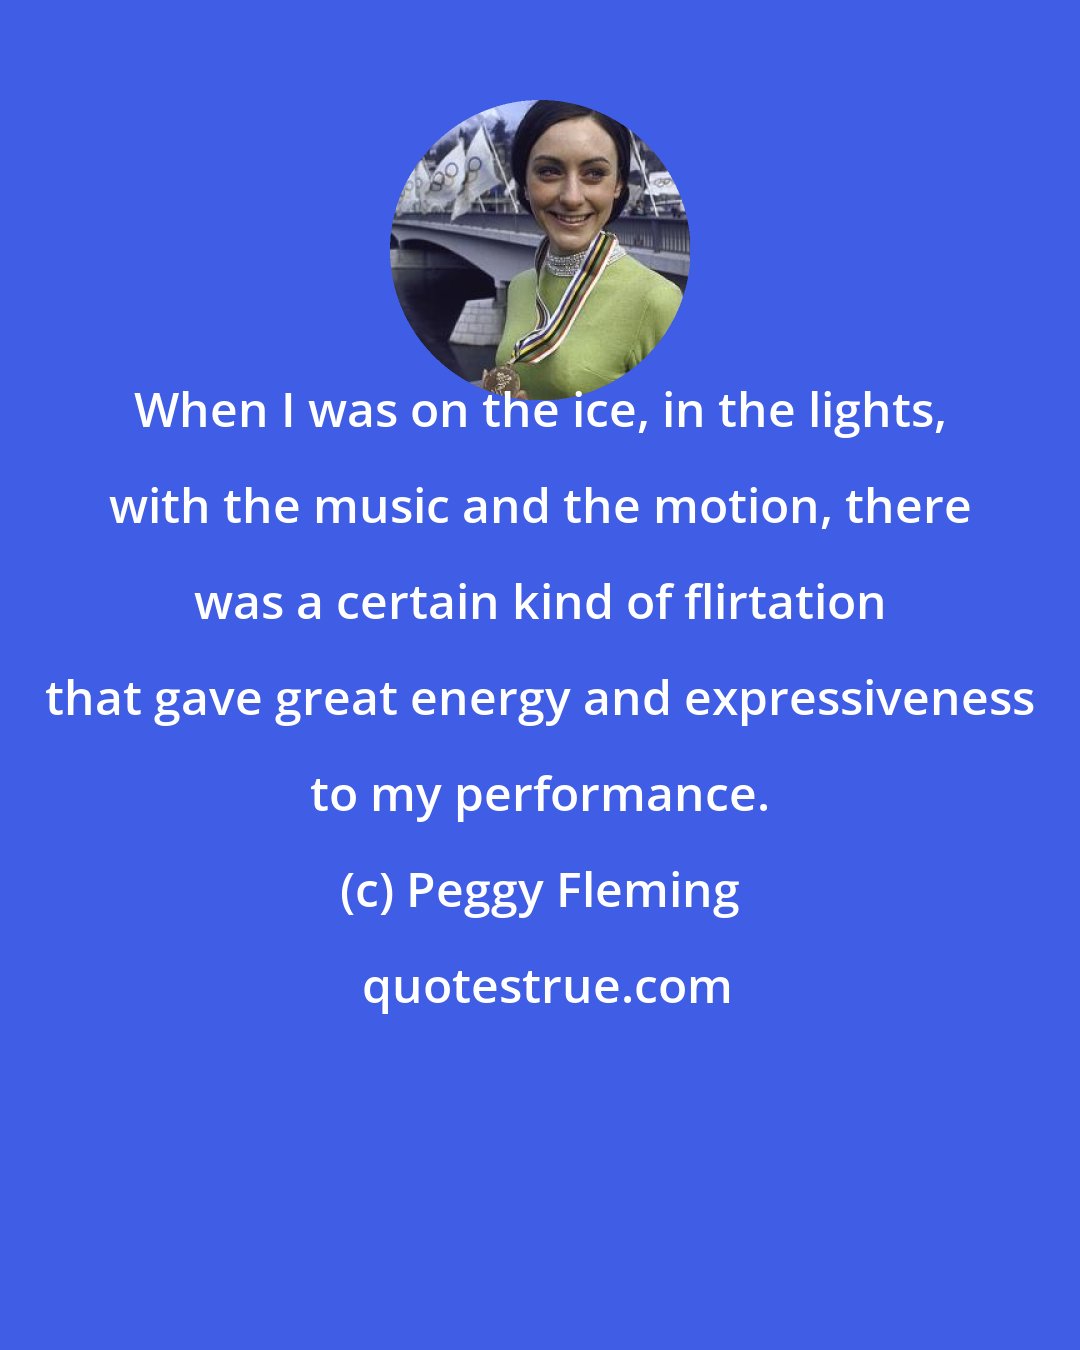 Peggy Fleming: When I was on the ice, in the lights, with the music and the motion, there was a certain kind of flirtation that gave great energy and expressiveness to my performance.